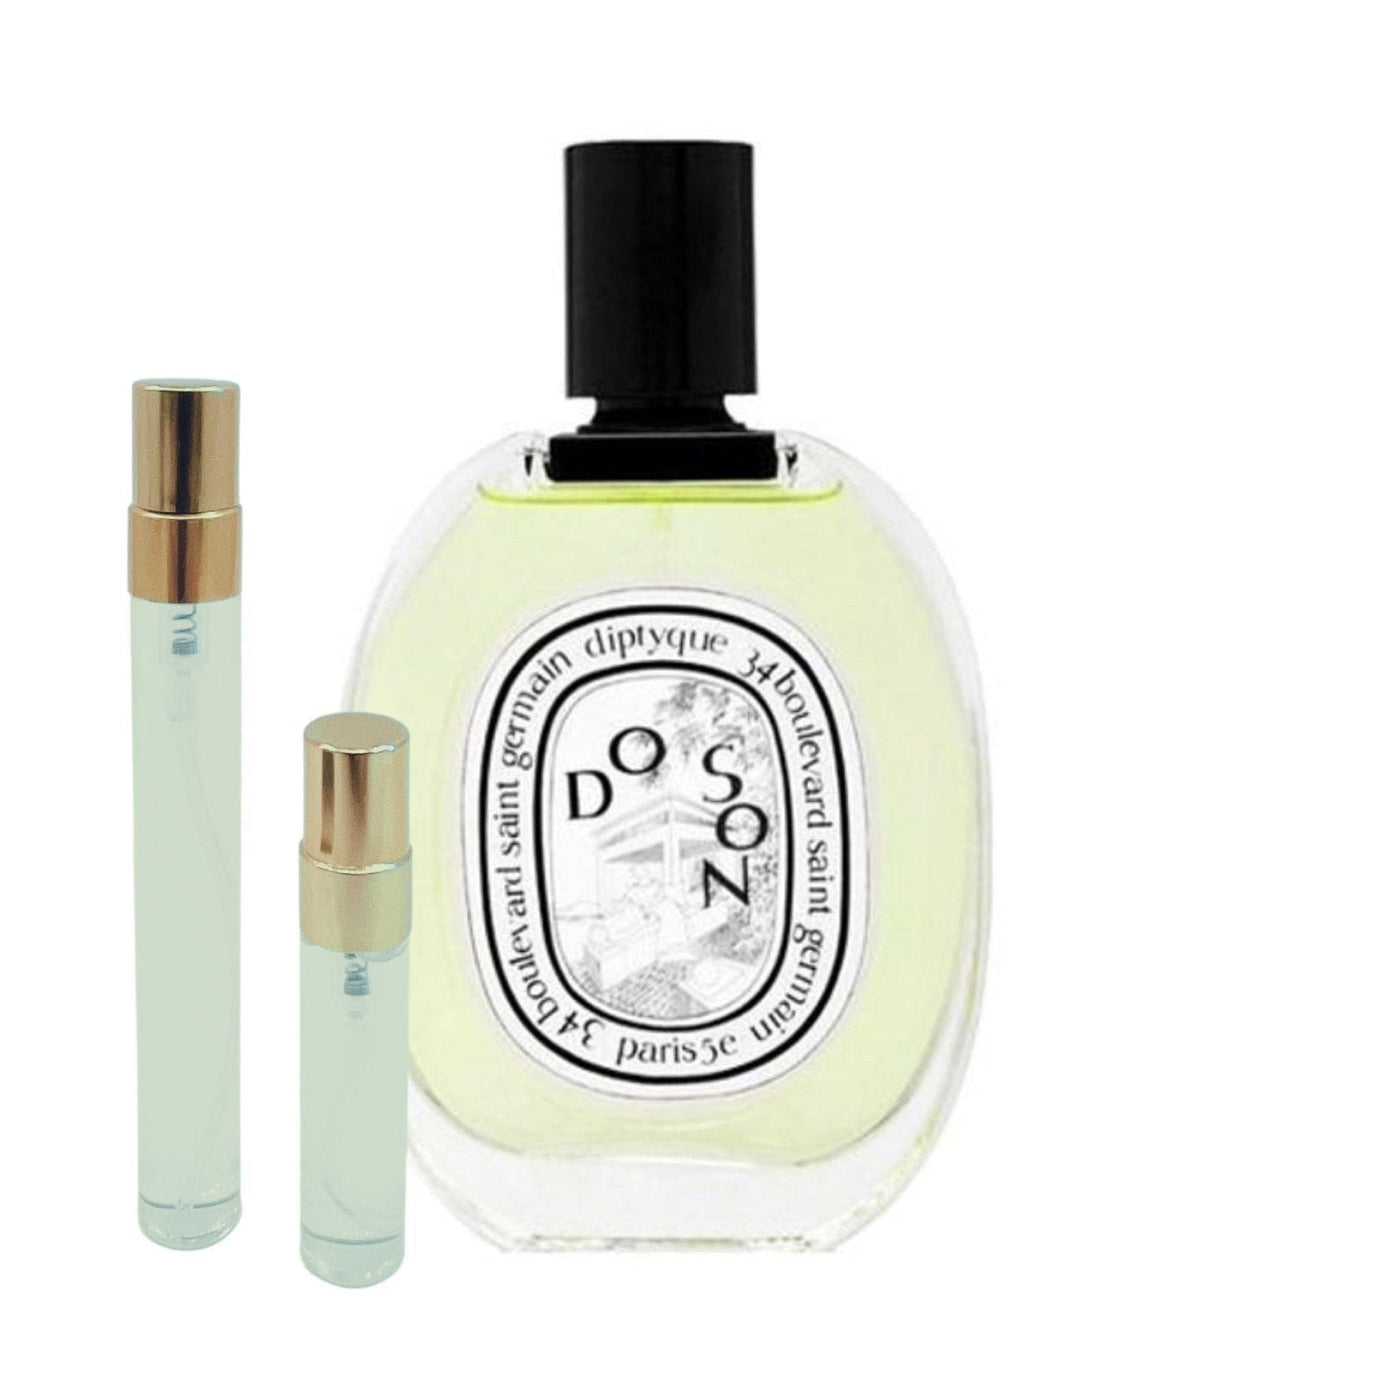 Do Son by Diptyque decant perfume 5ml and 10 ml